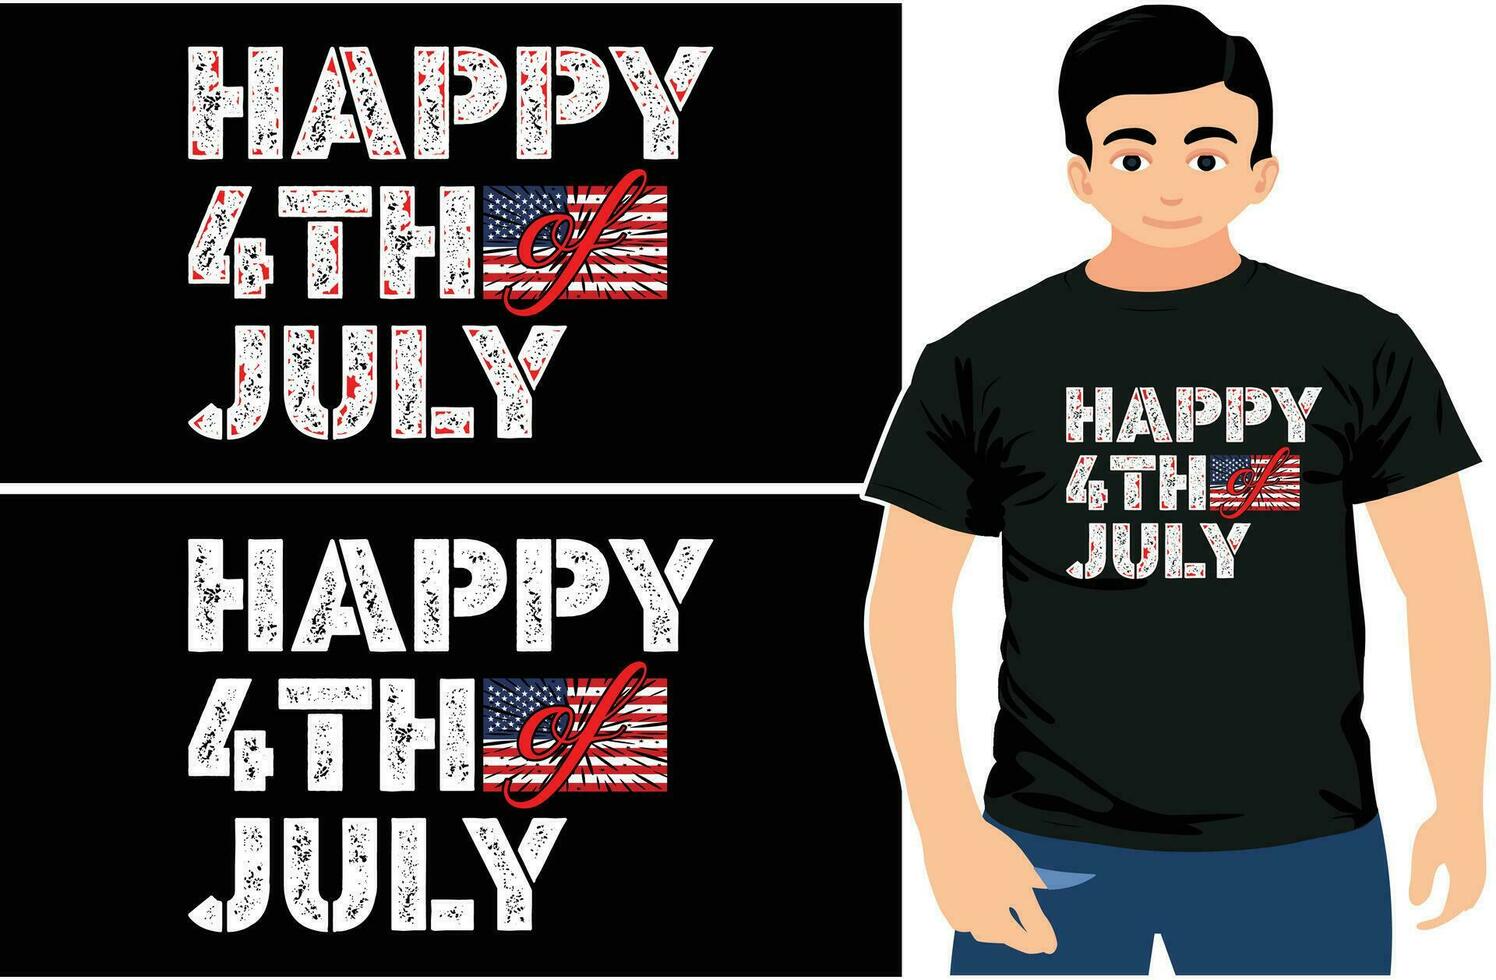 Happy 4th July T-shirt Design Template, 4th of July shirt, HoliDay T-shirt Design vector